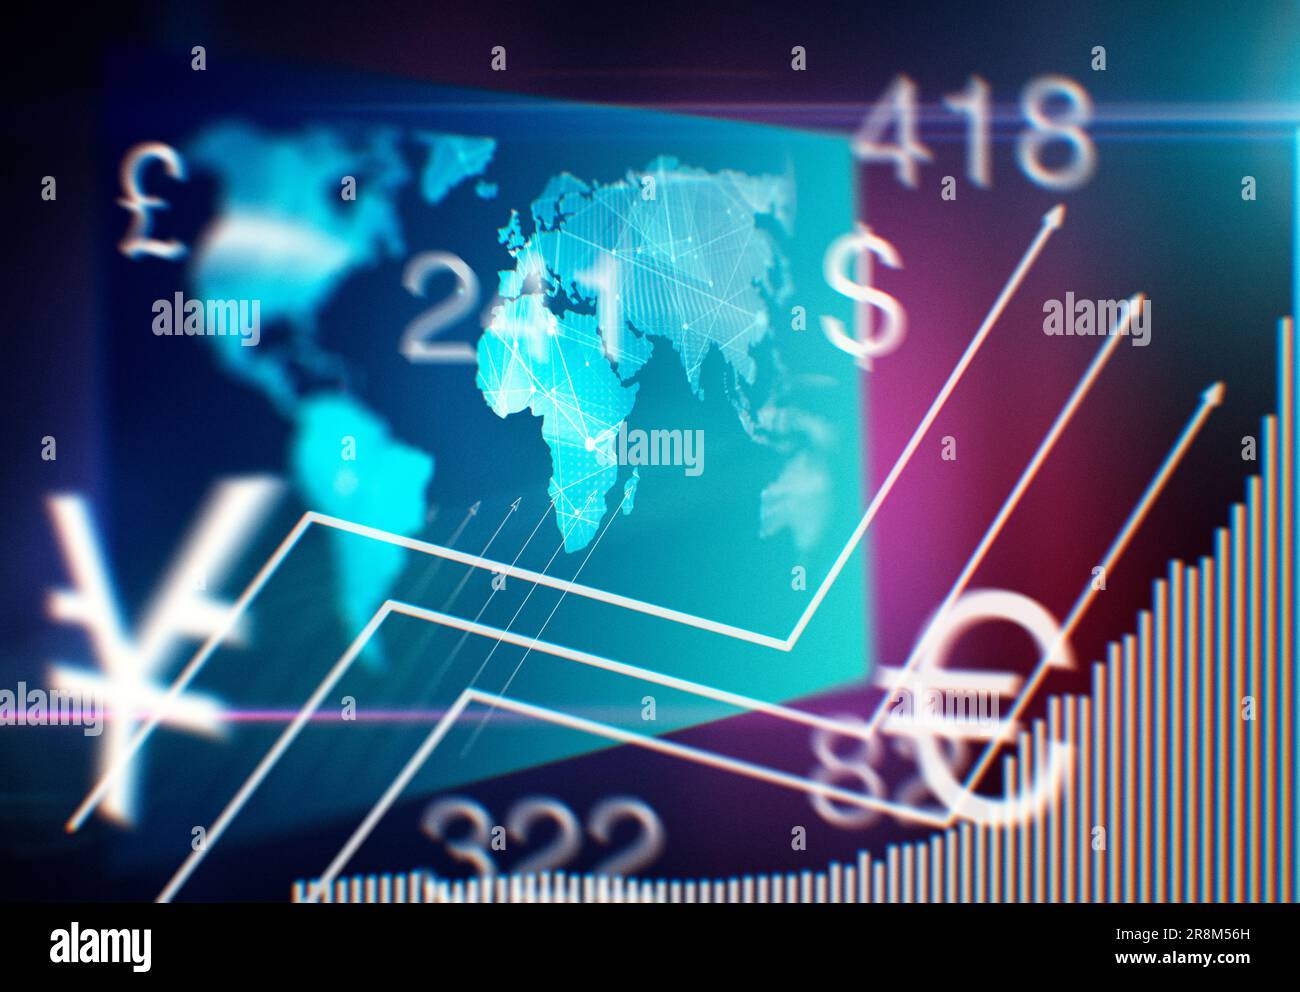 World map and various currencies representing financial instability Stock Photo